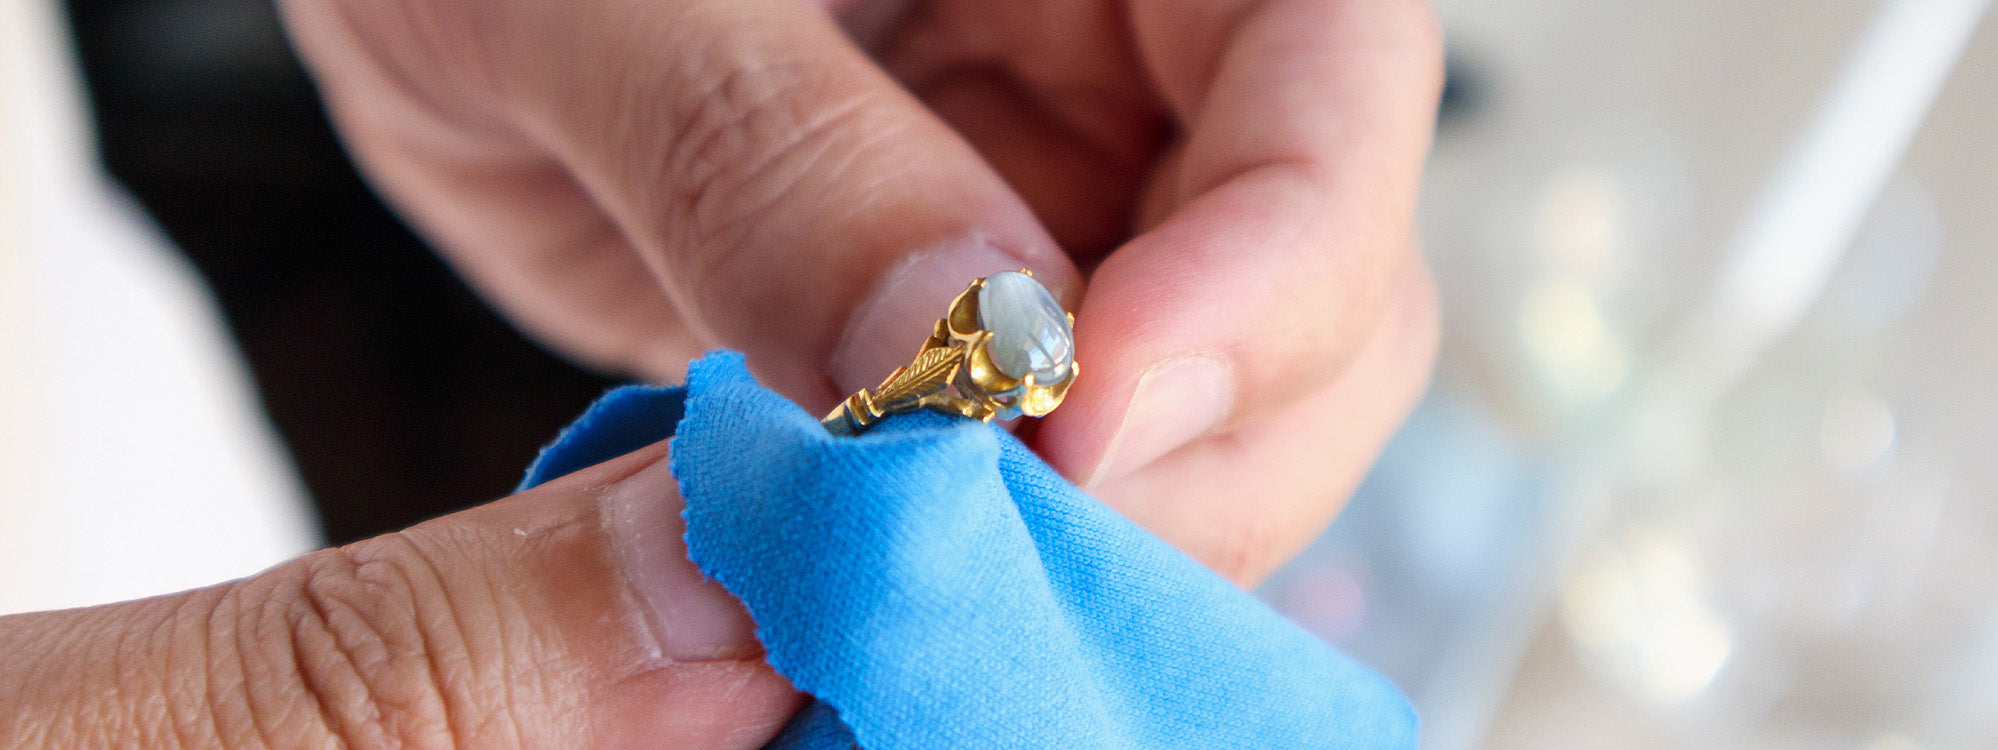 How To Clean Gold-Plated Jewelry When Tarnished